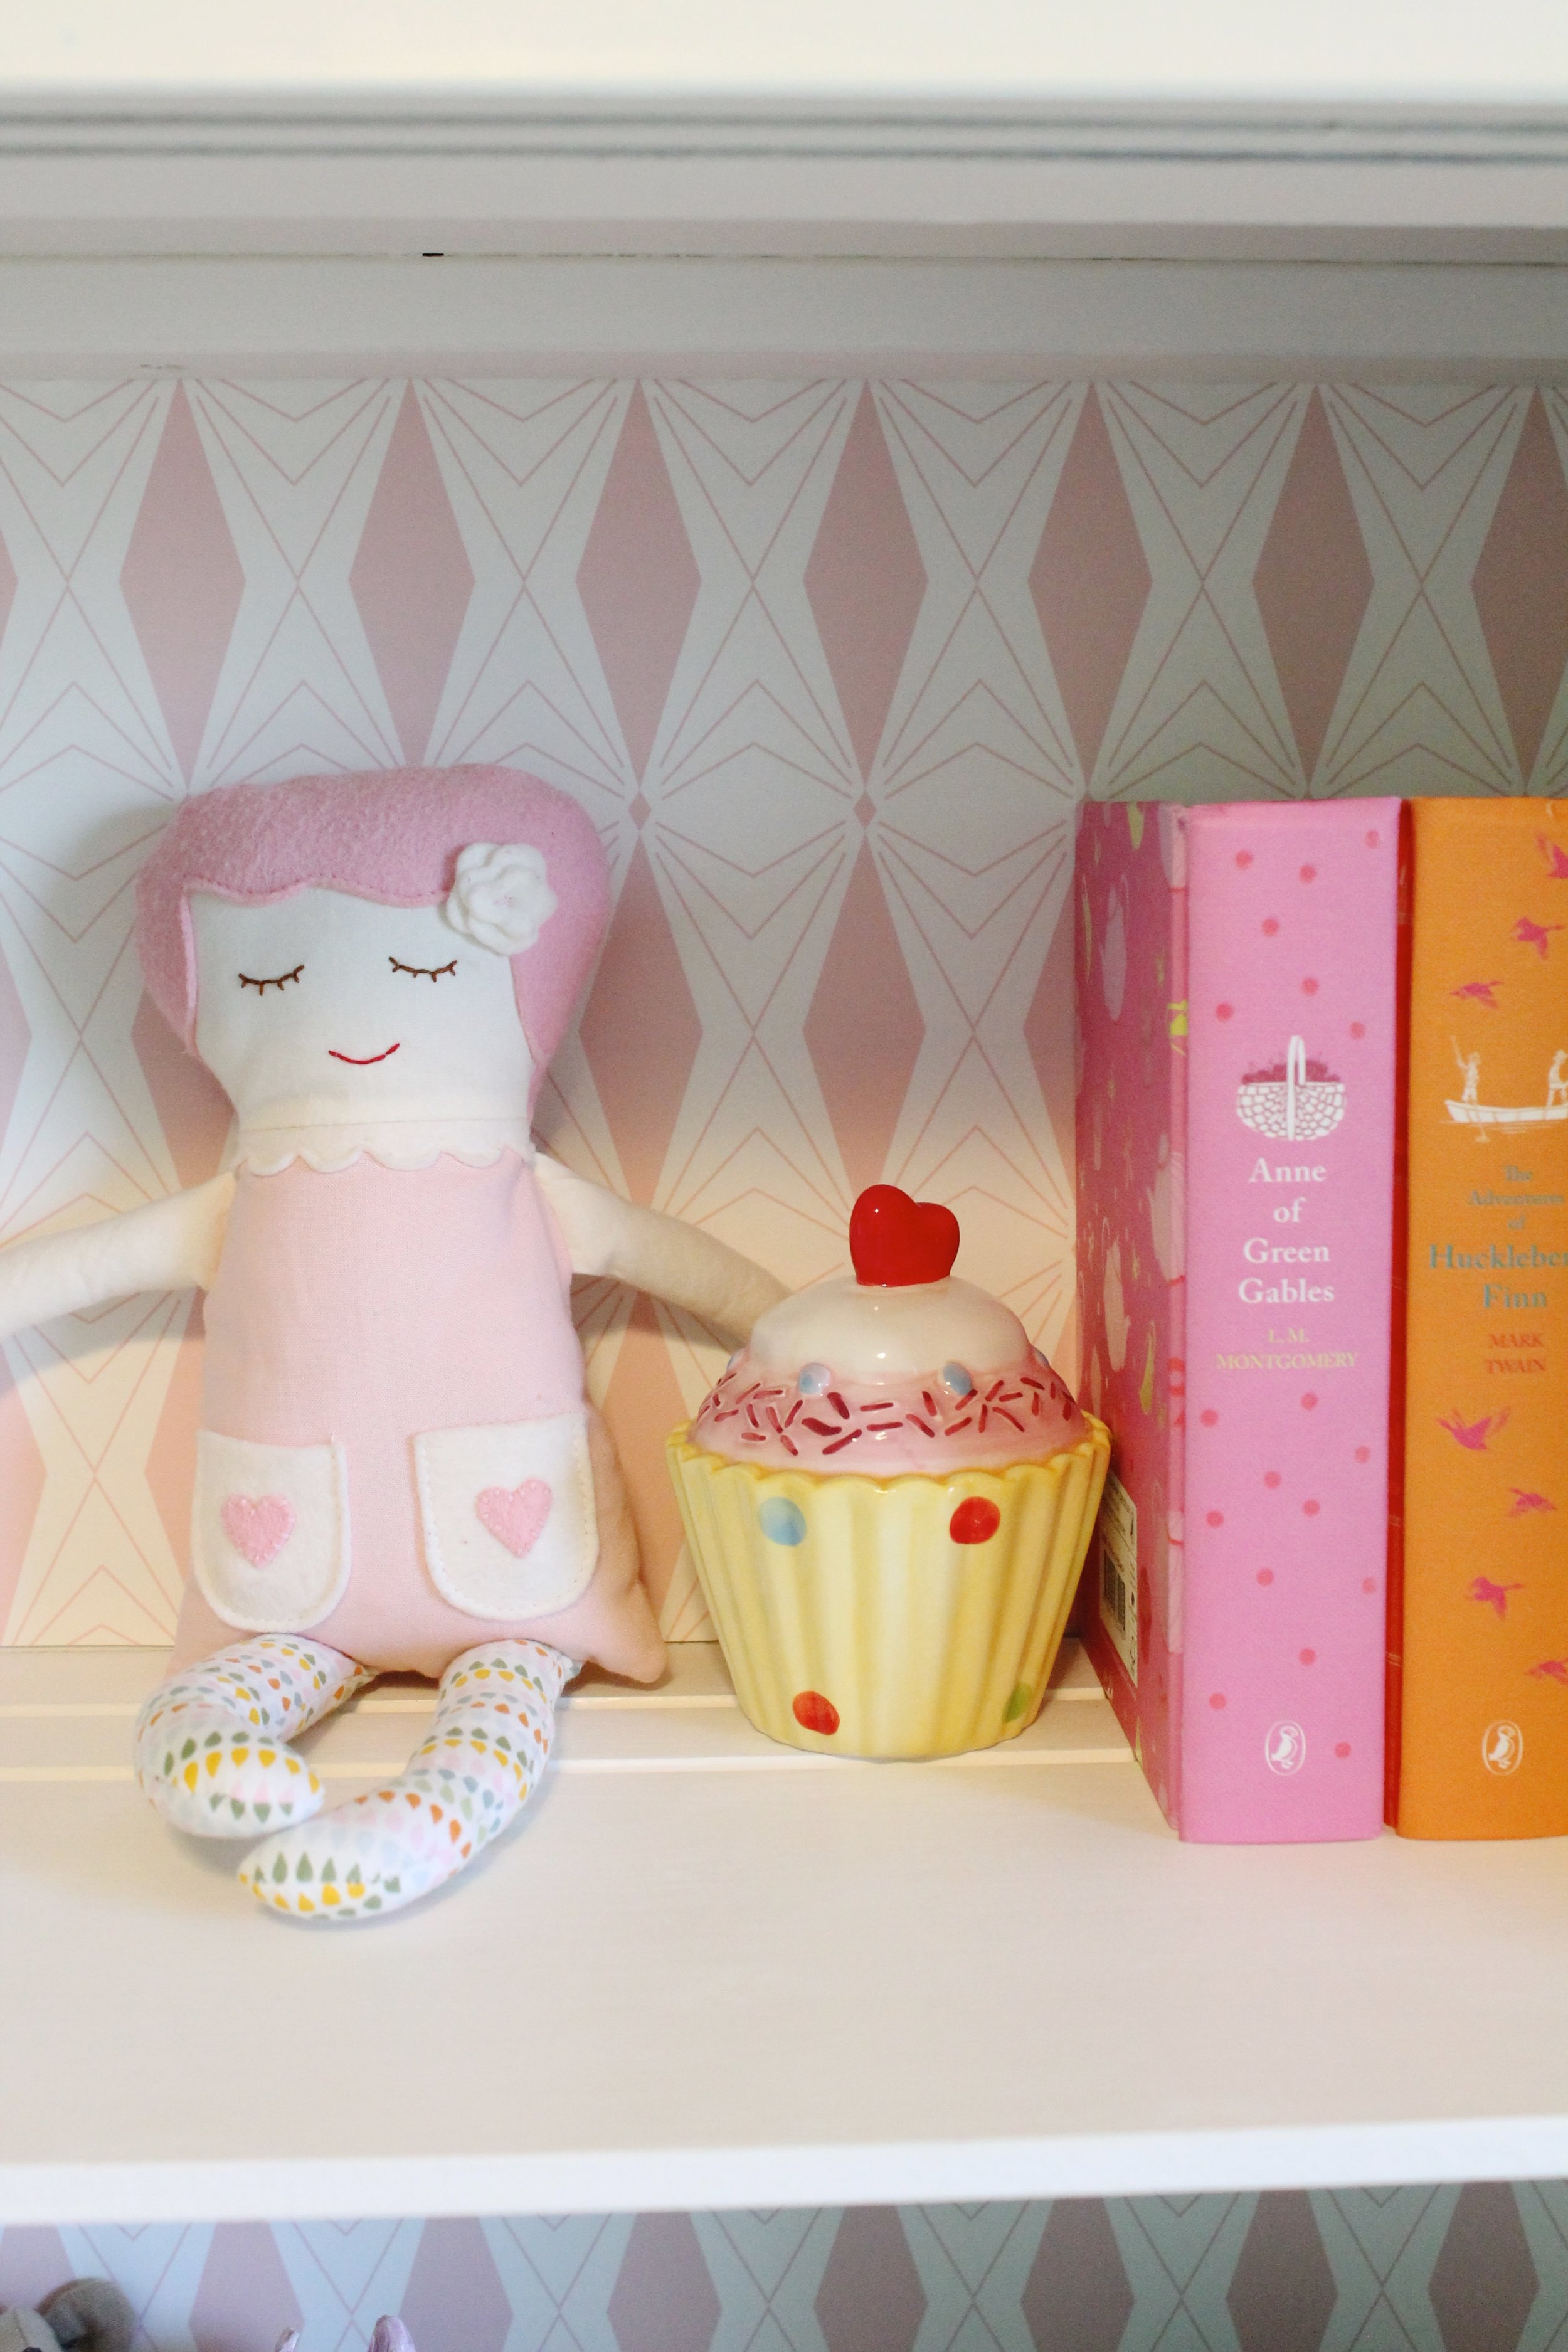 Black Apple Doll, Puffin Books and cupcake bank.